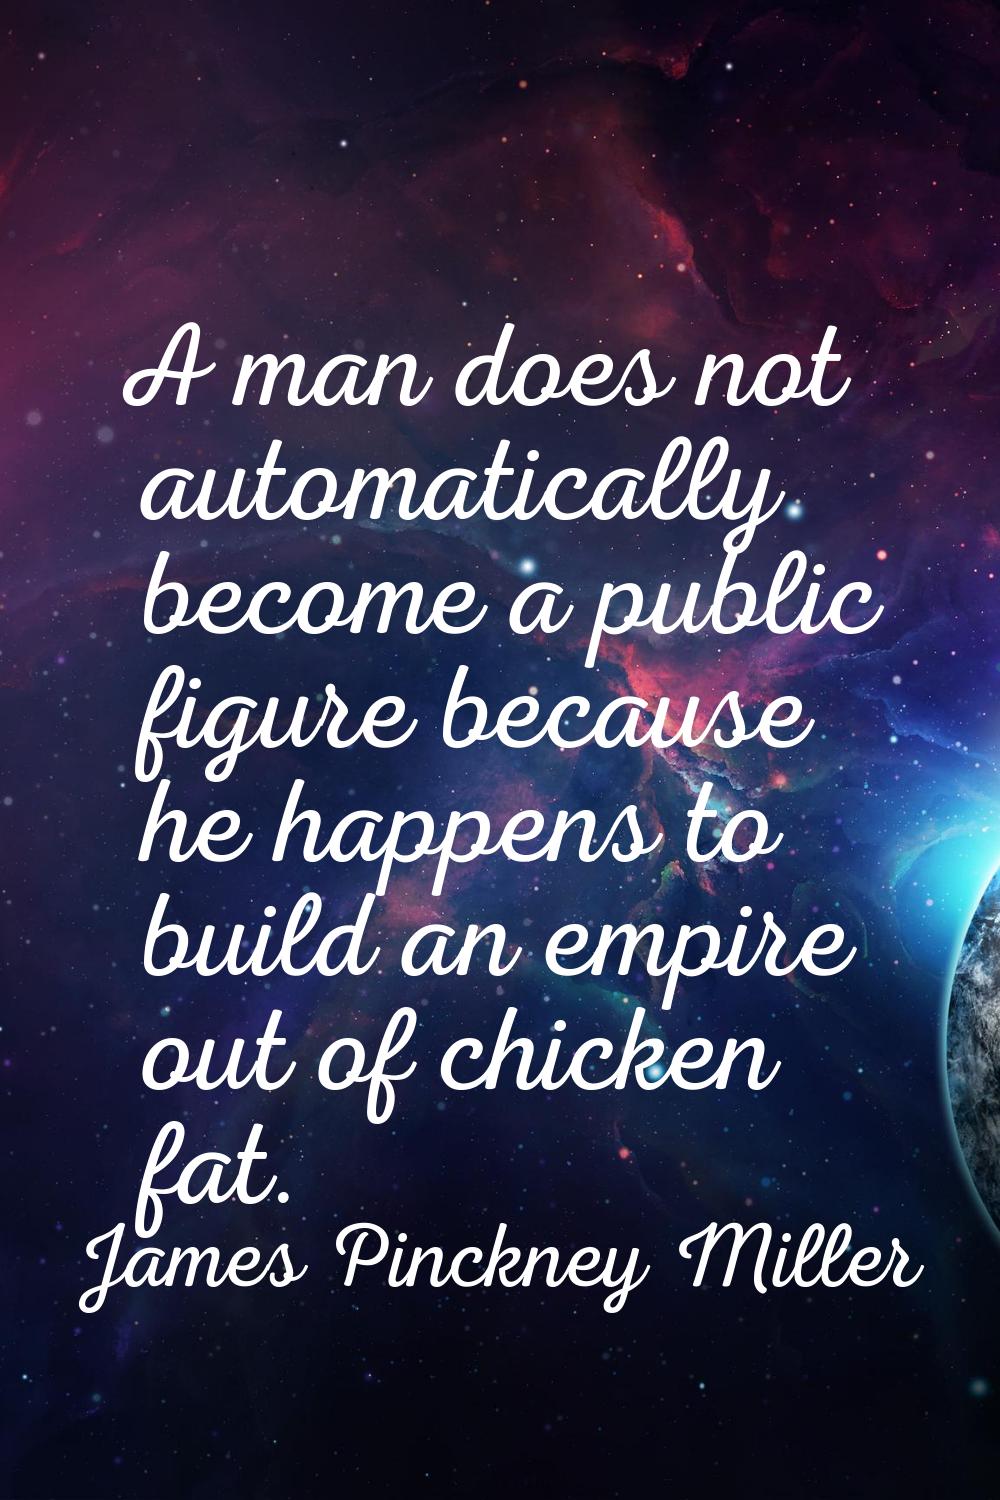 A man does not automatically become a public figure because he happens to build an empire out of ch